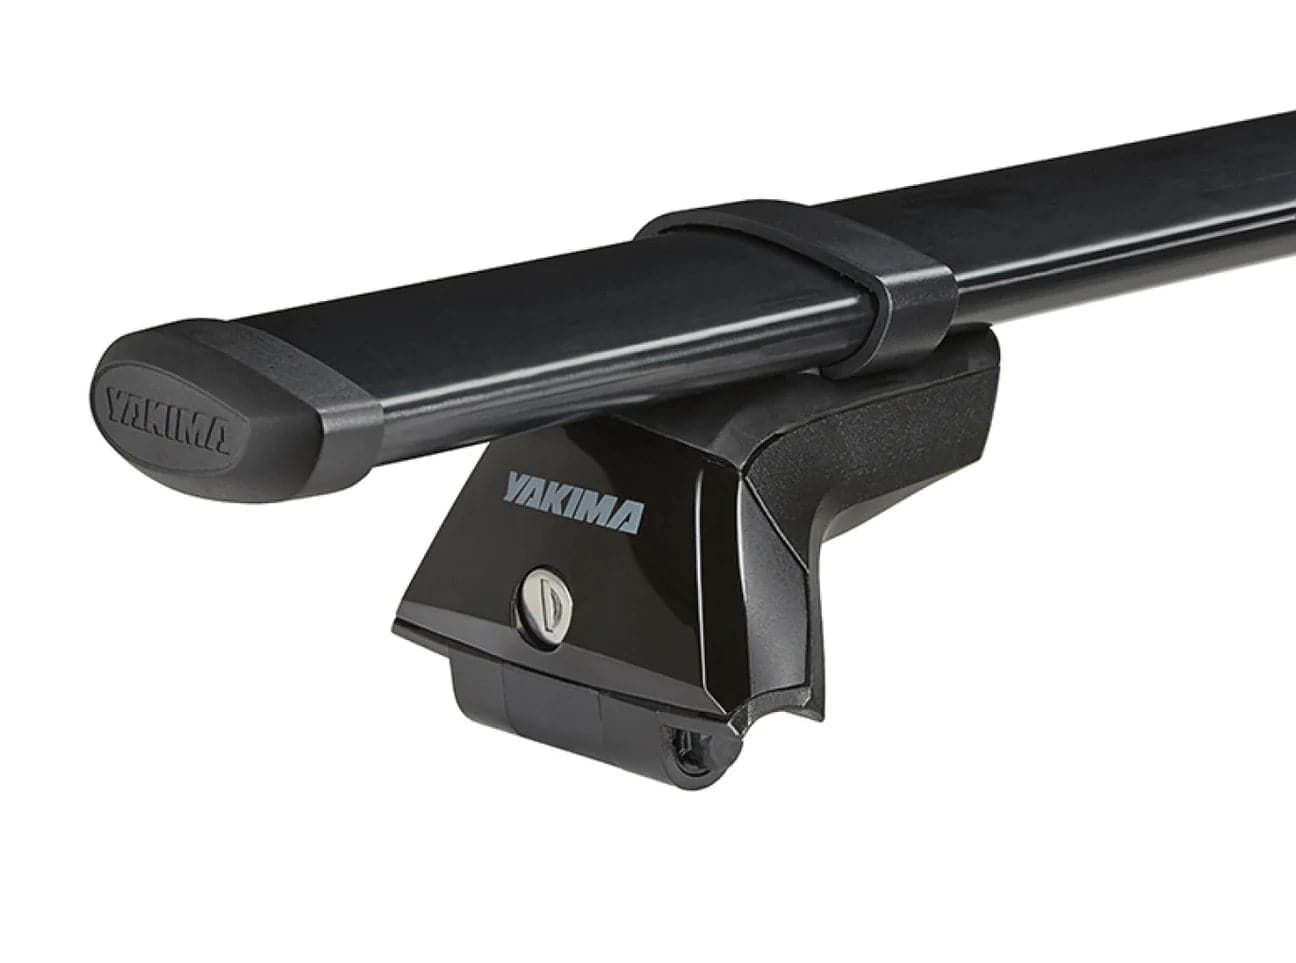 Featuring the Skyline Tower roof rack manufactured by Yakima shown here from a fourth angle.